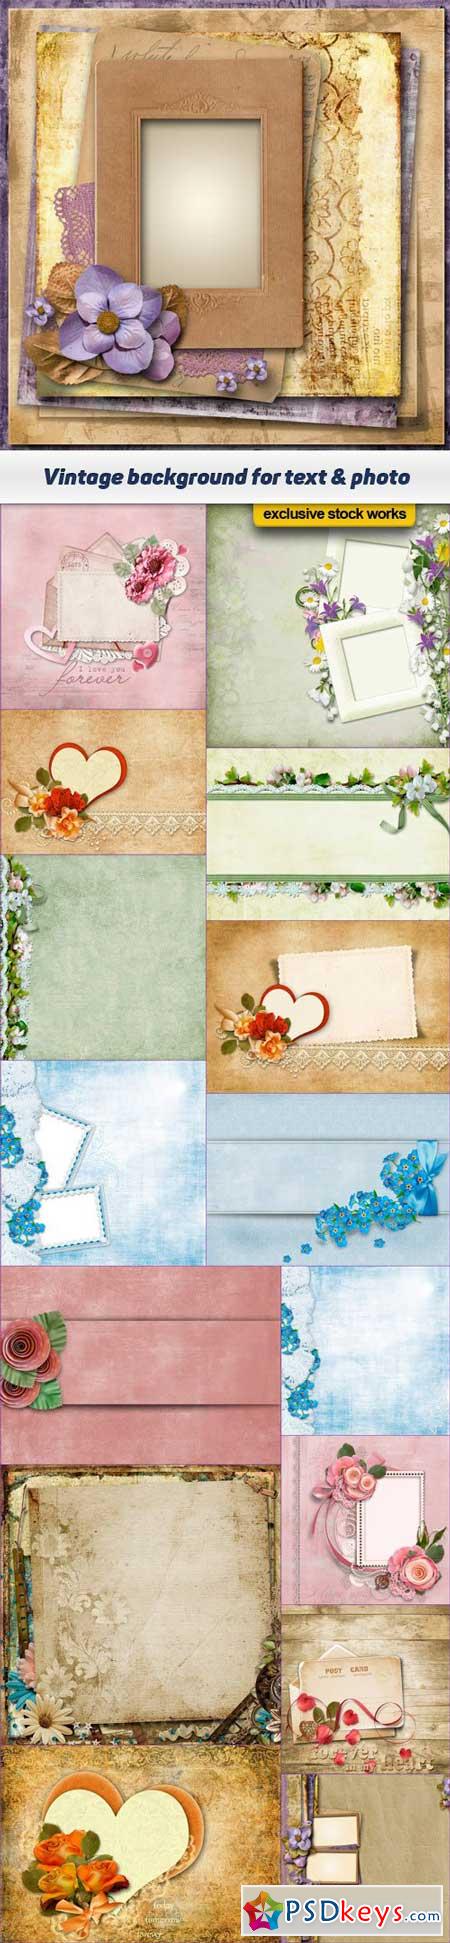 Vintage background for text & photo 16x JPEG